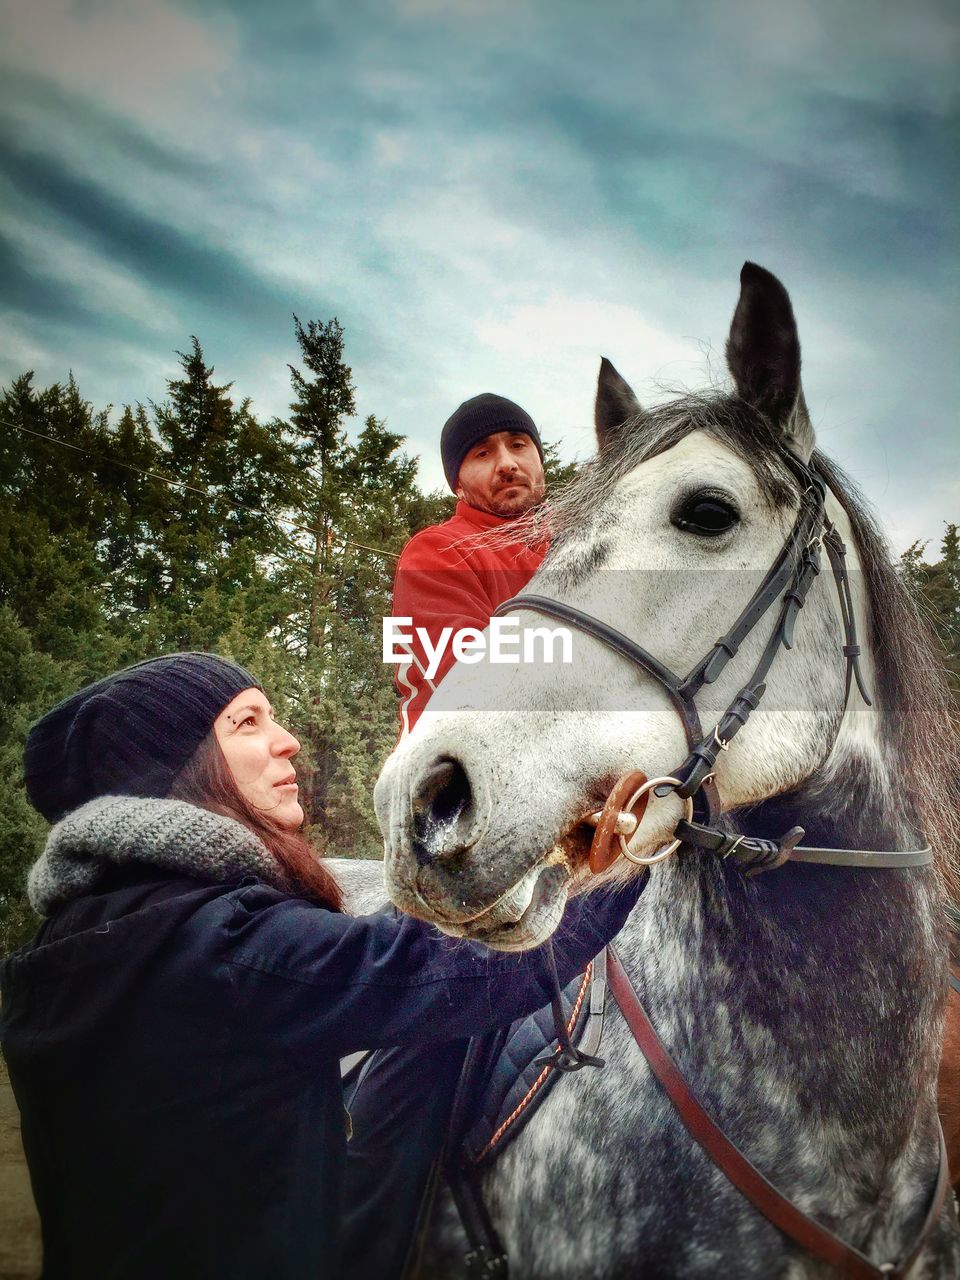 Low angle view of friends with horse against cloudy sky